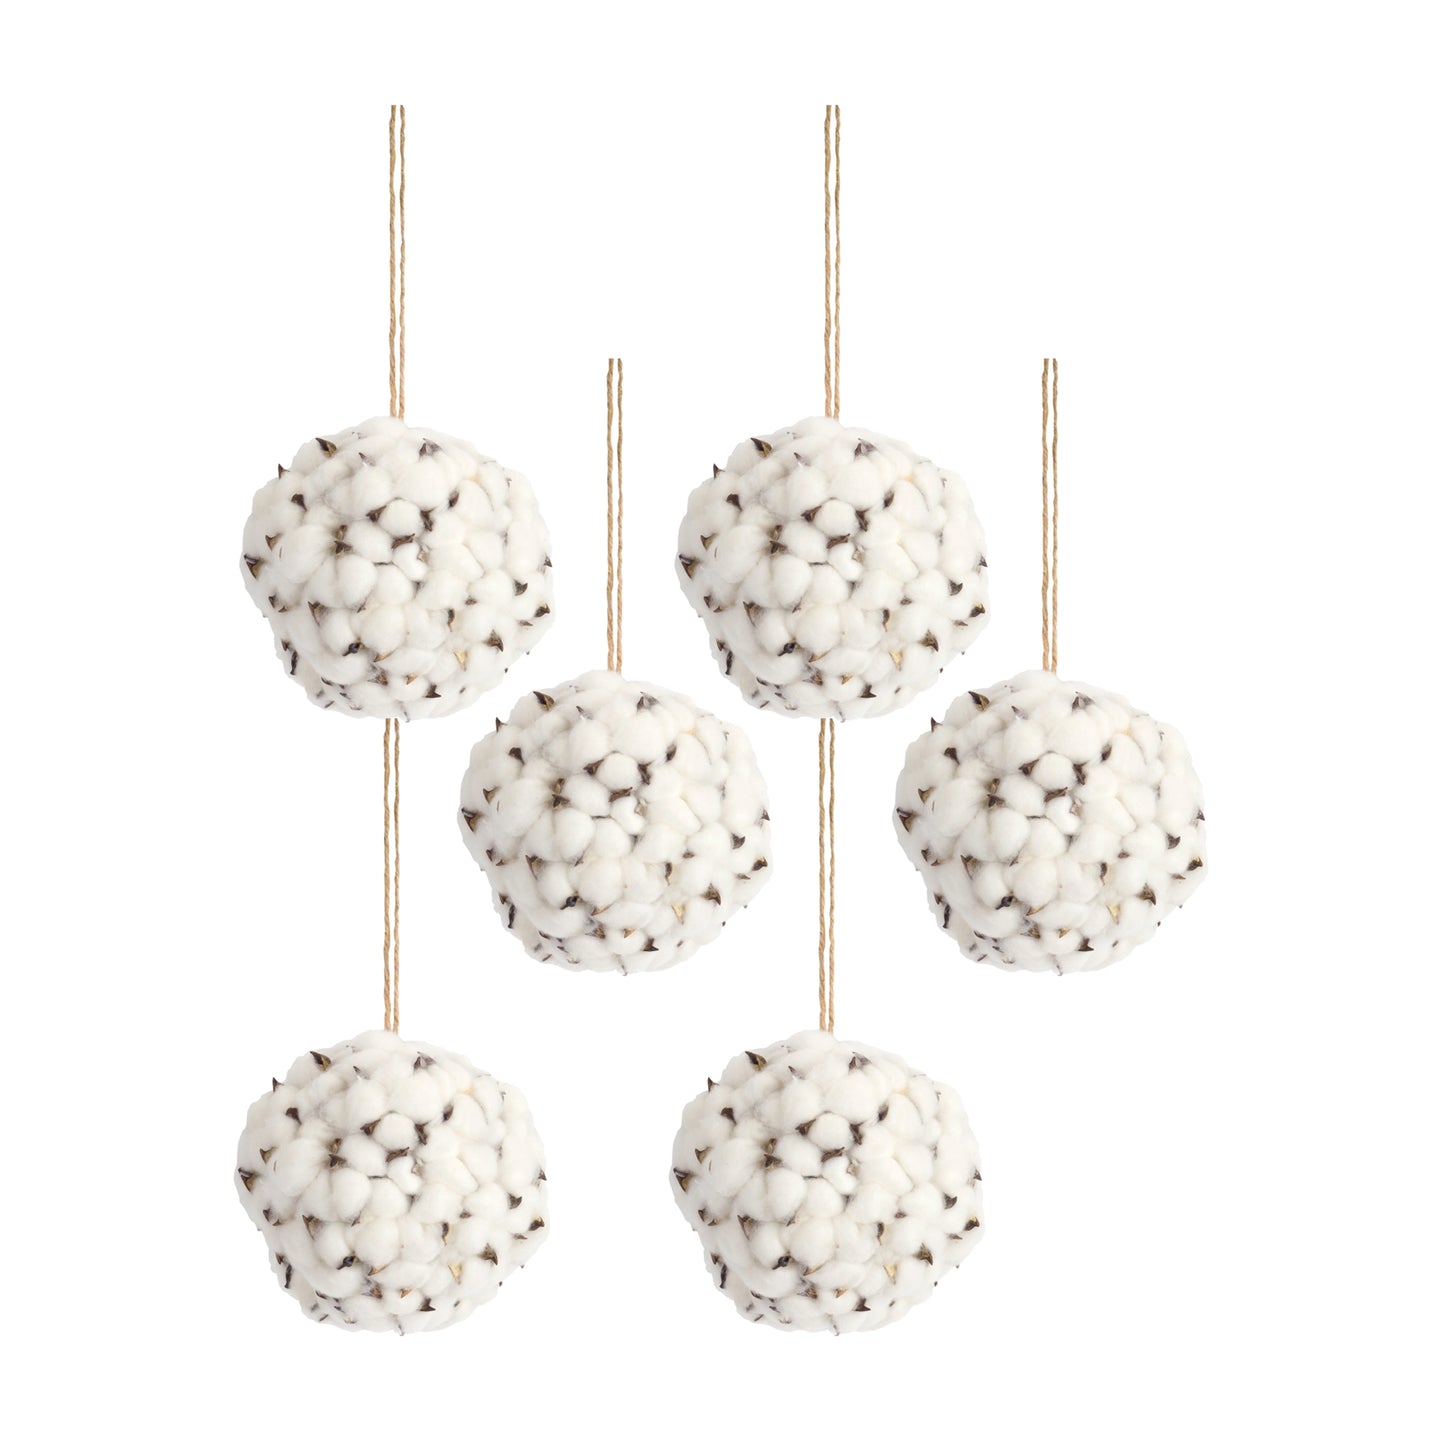 Cotton Orb with Twine Hanger (Set of 6)